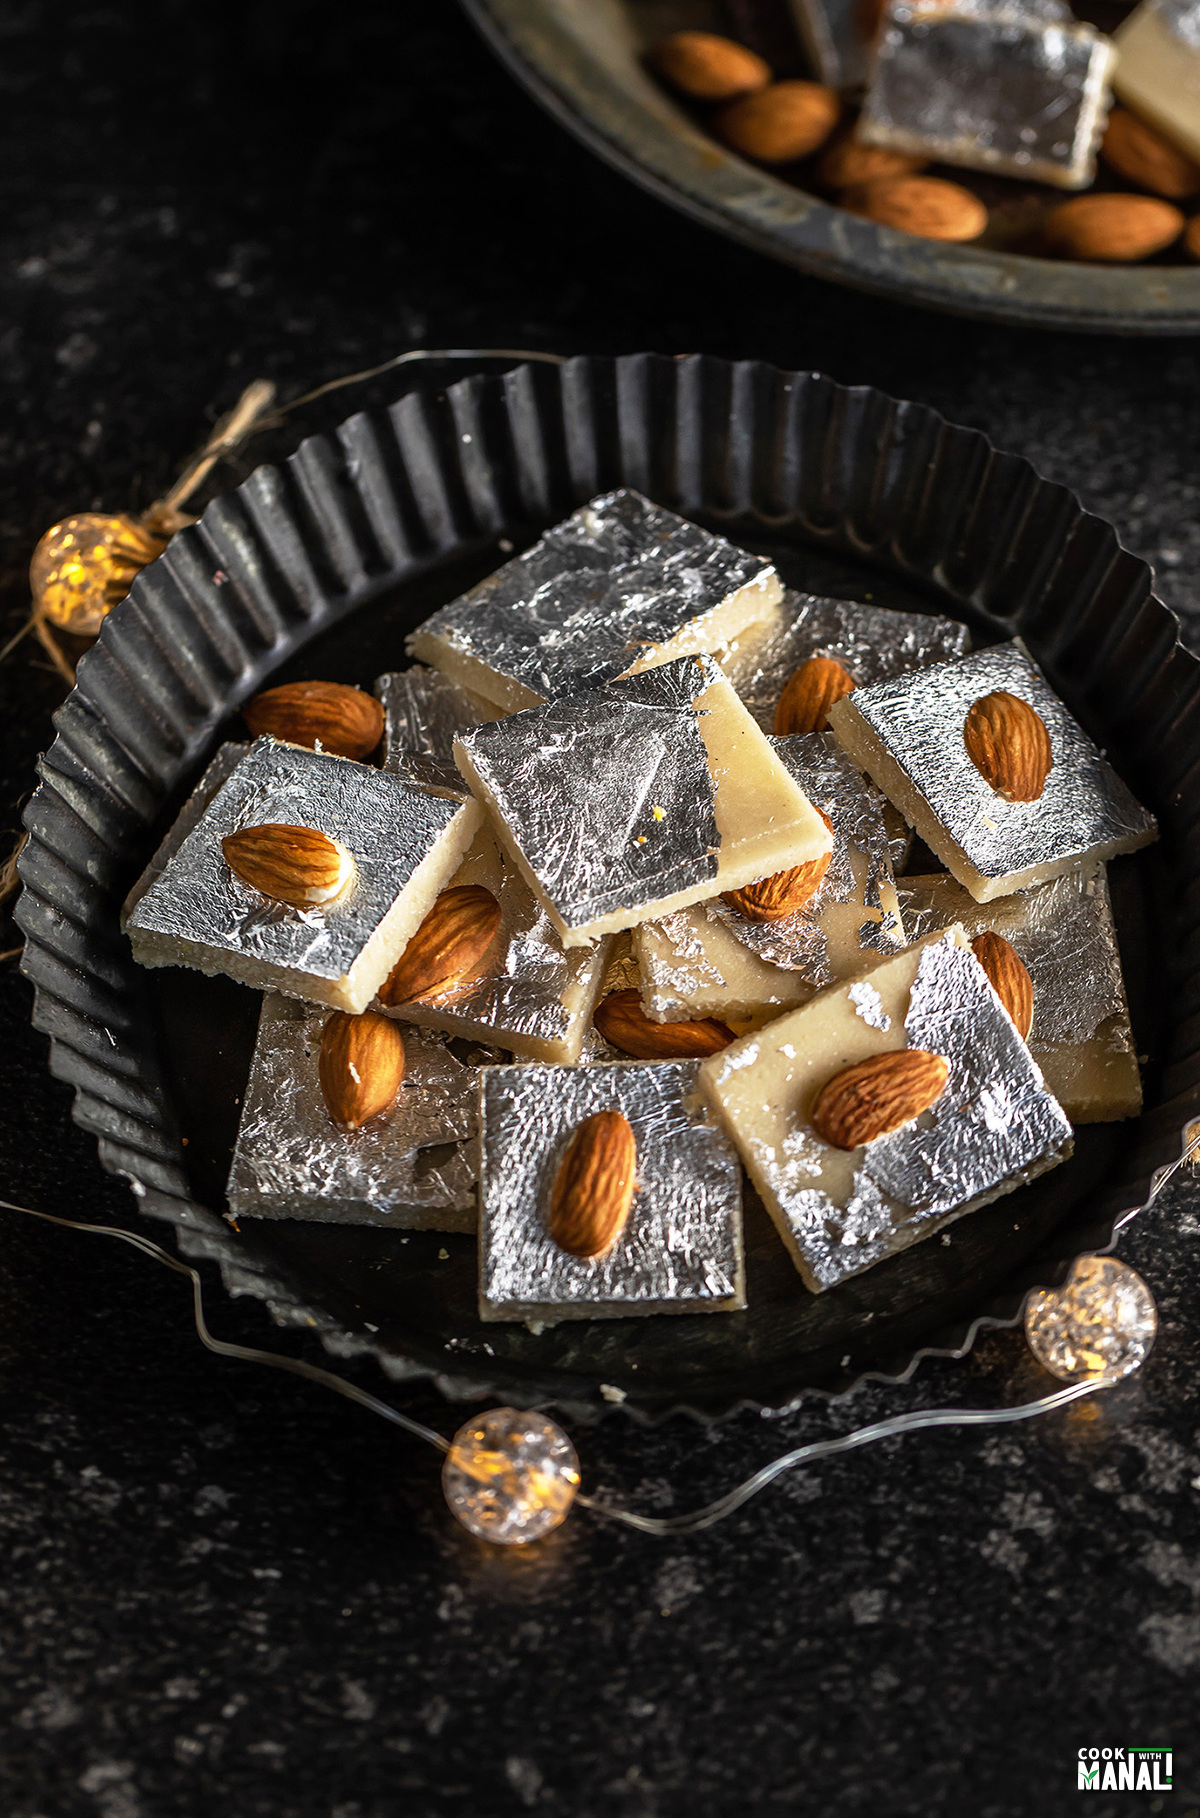 badam burfi placed in a black plate surrounded by lights and a plate of almonds in the background